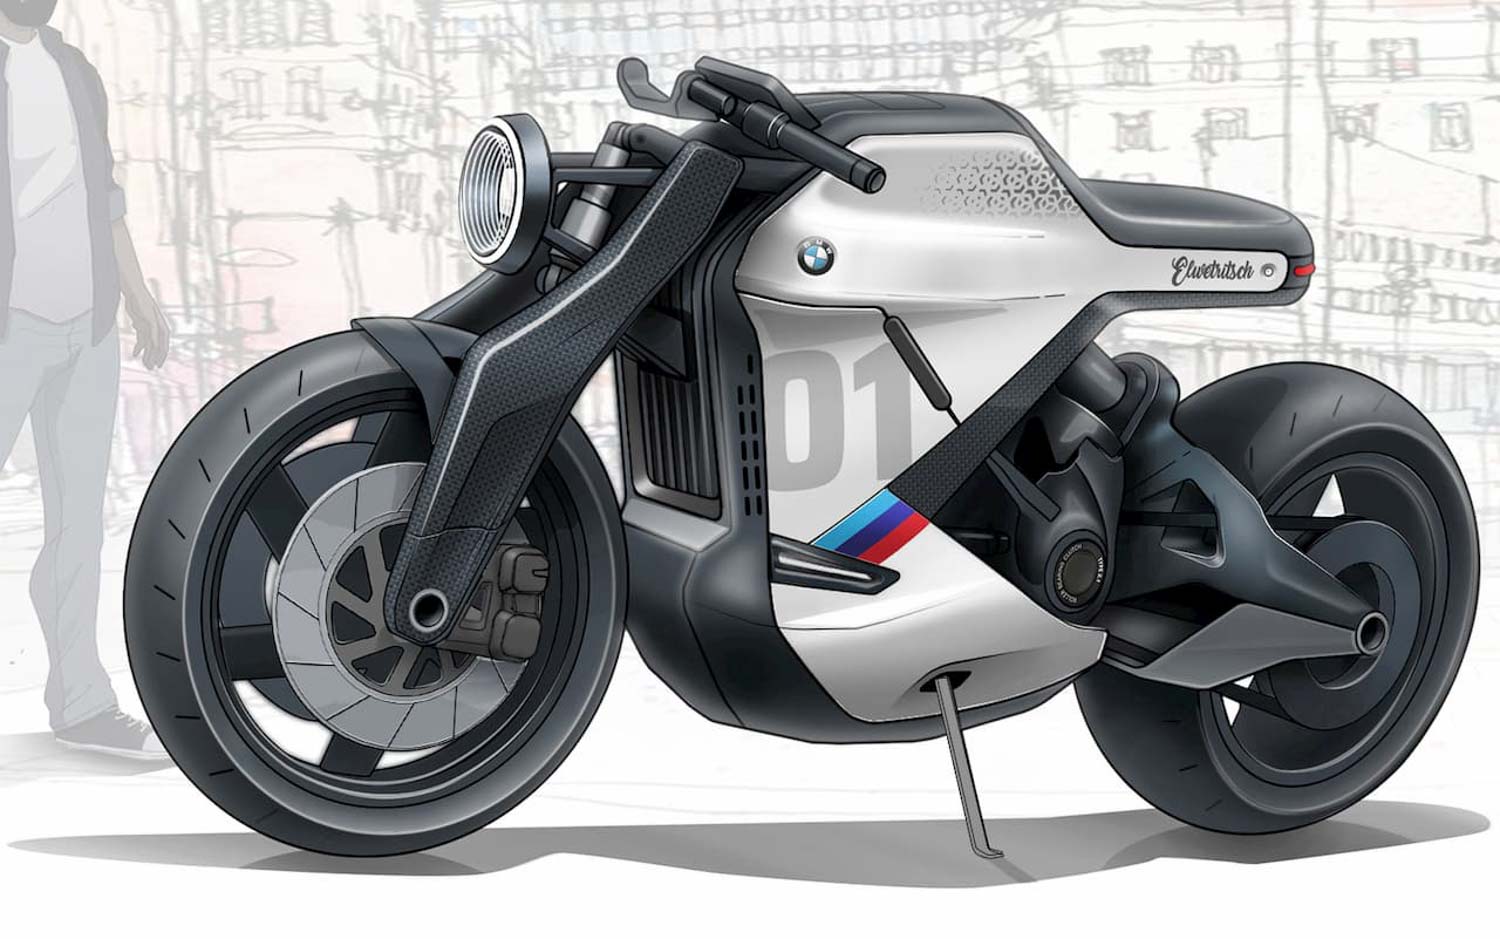 This BMW All-Electric Cafe Racer Rendering Looks Futuristic